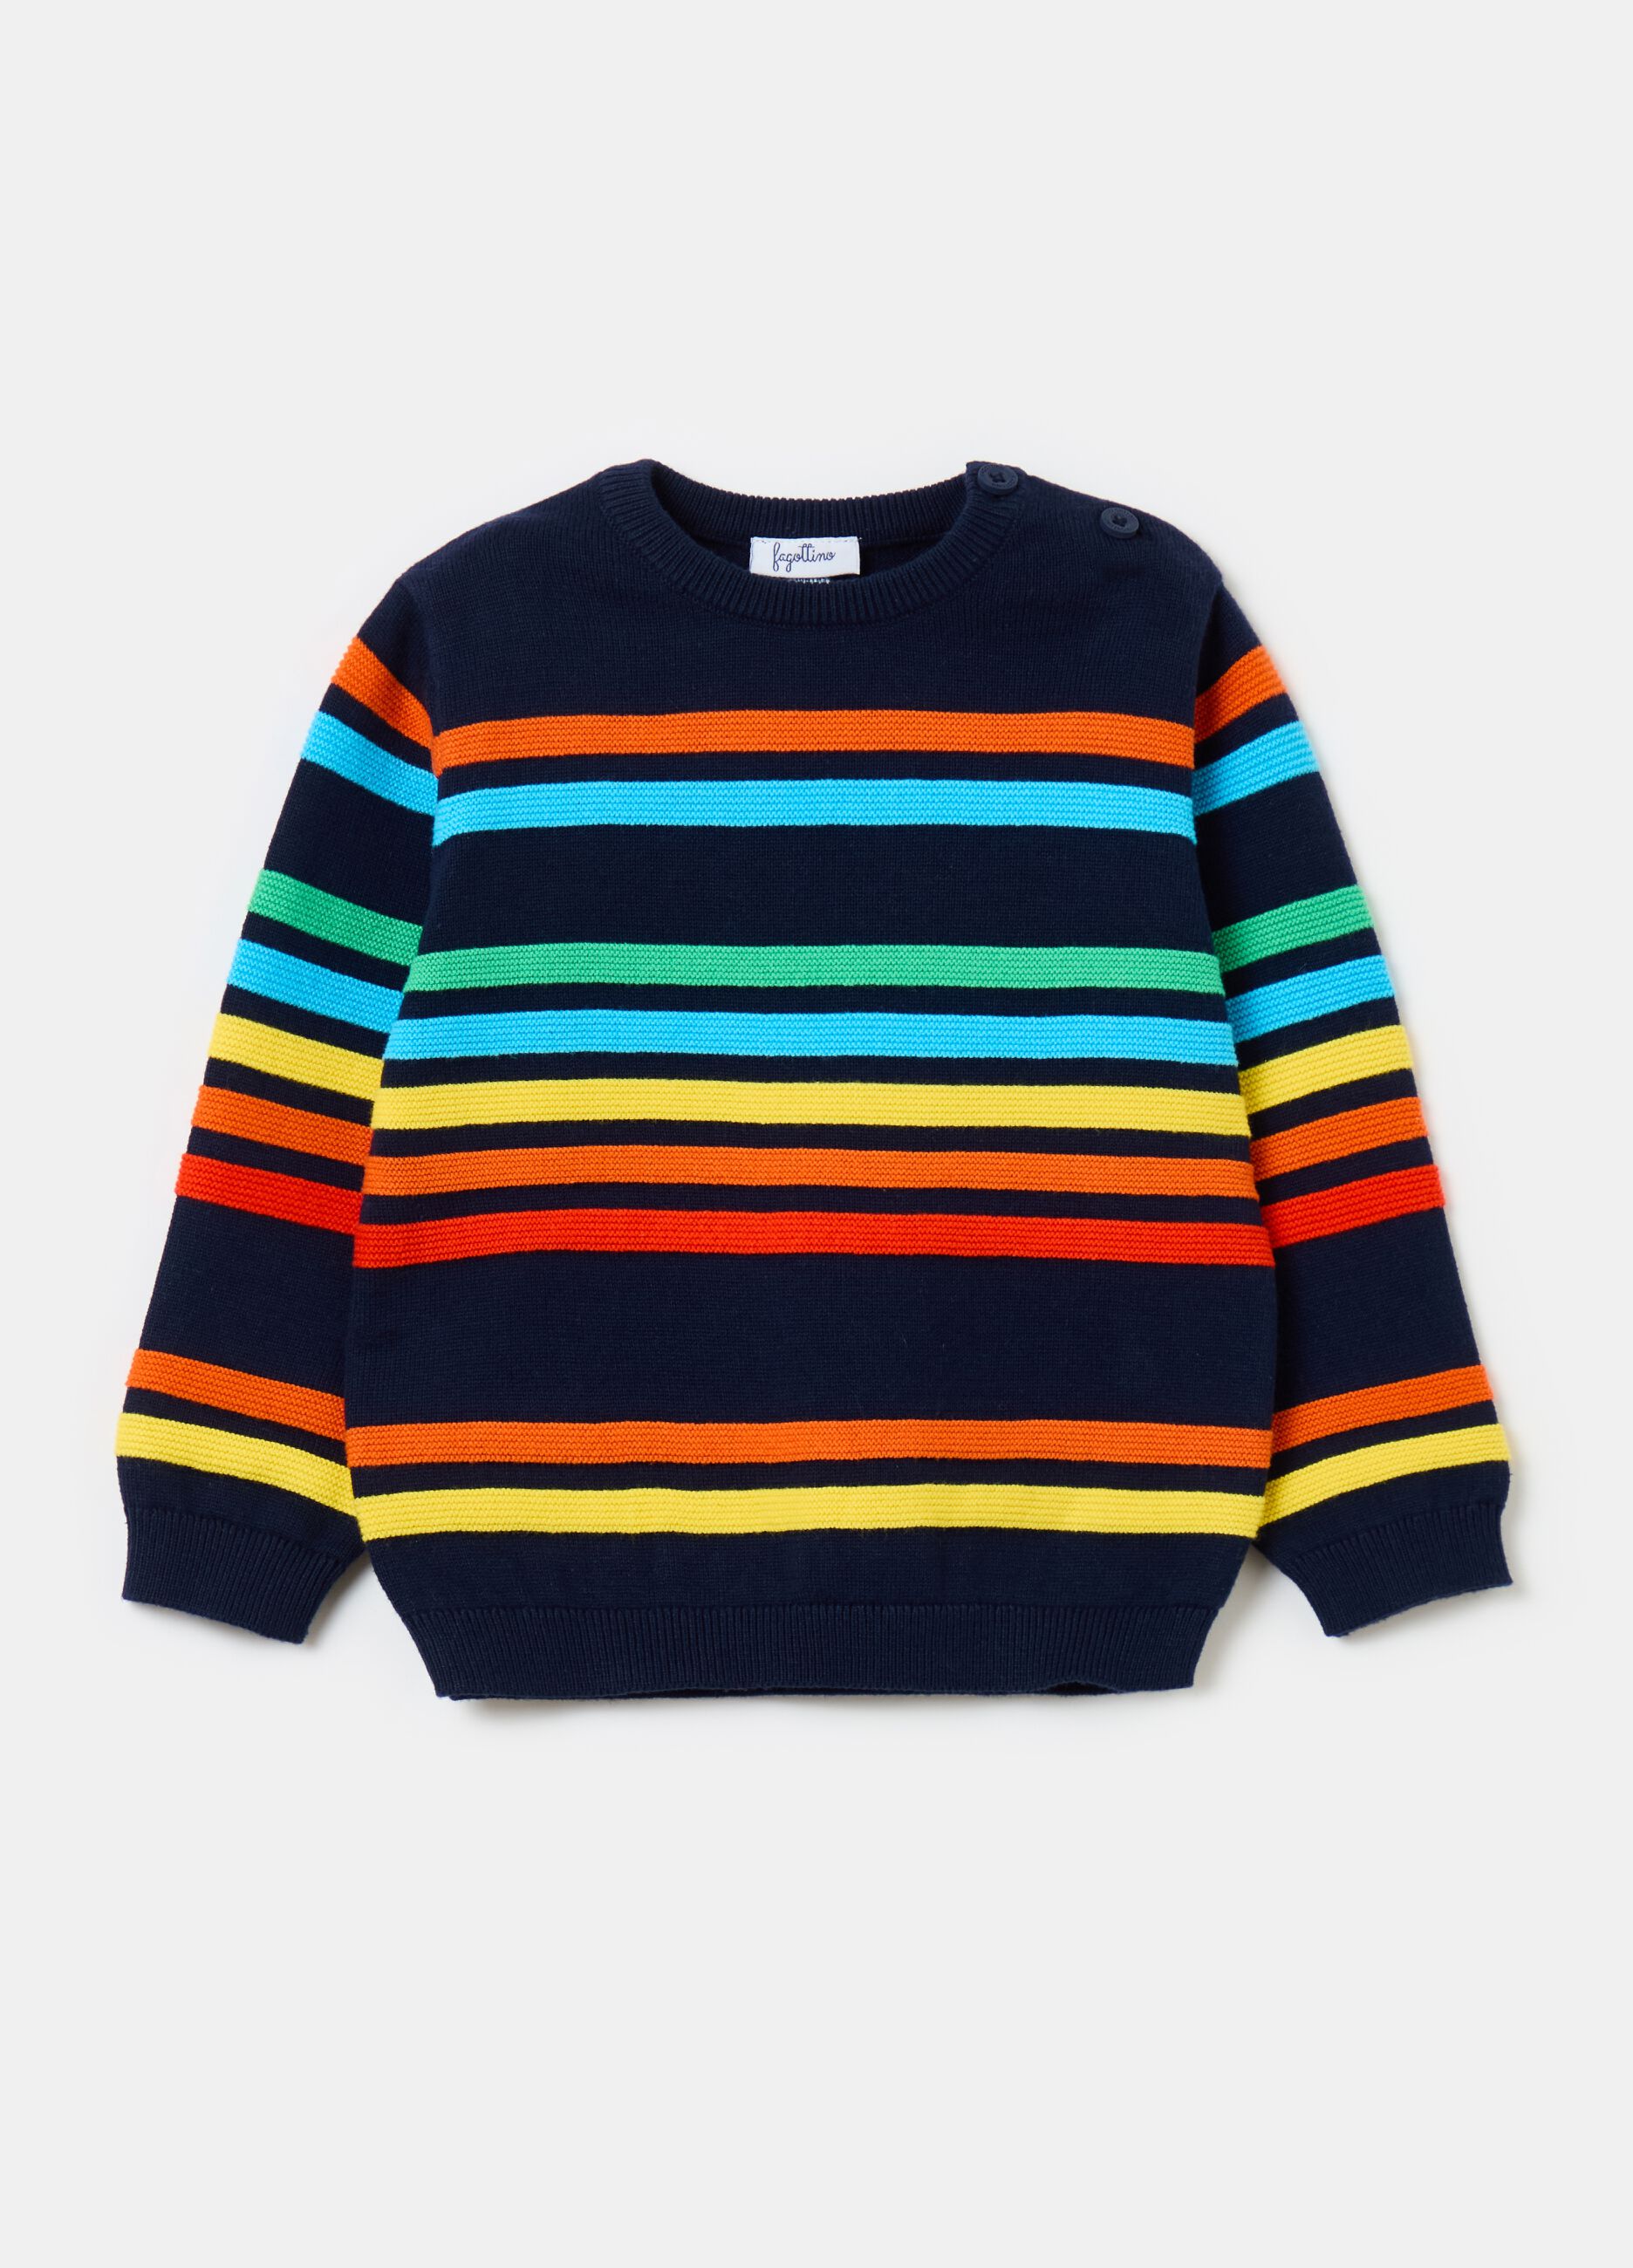 Cotton pullover with striped pattern